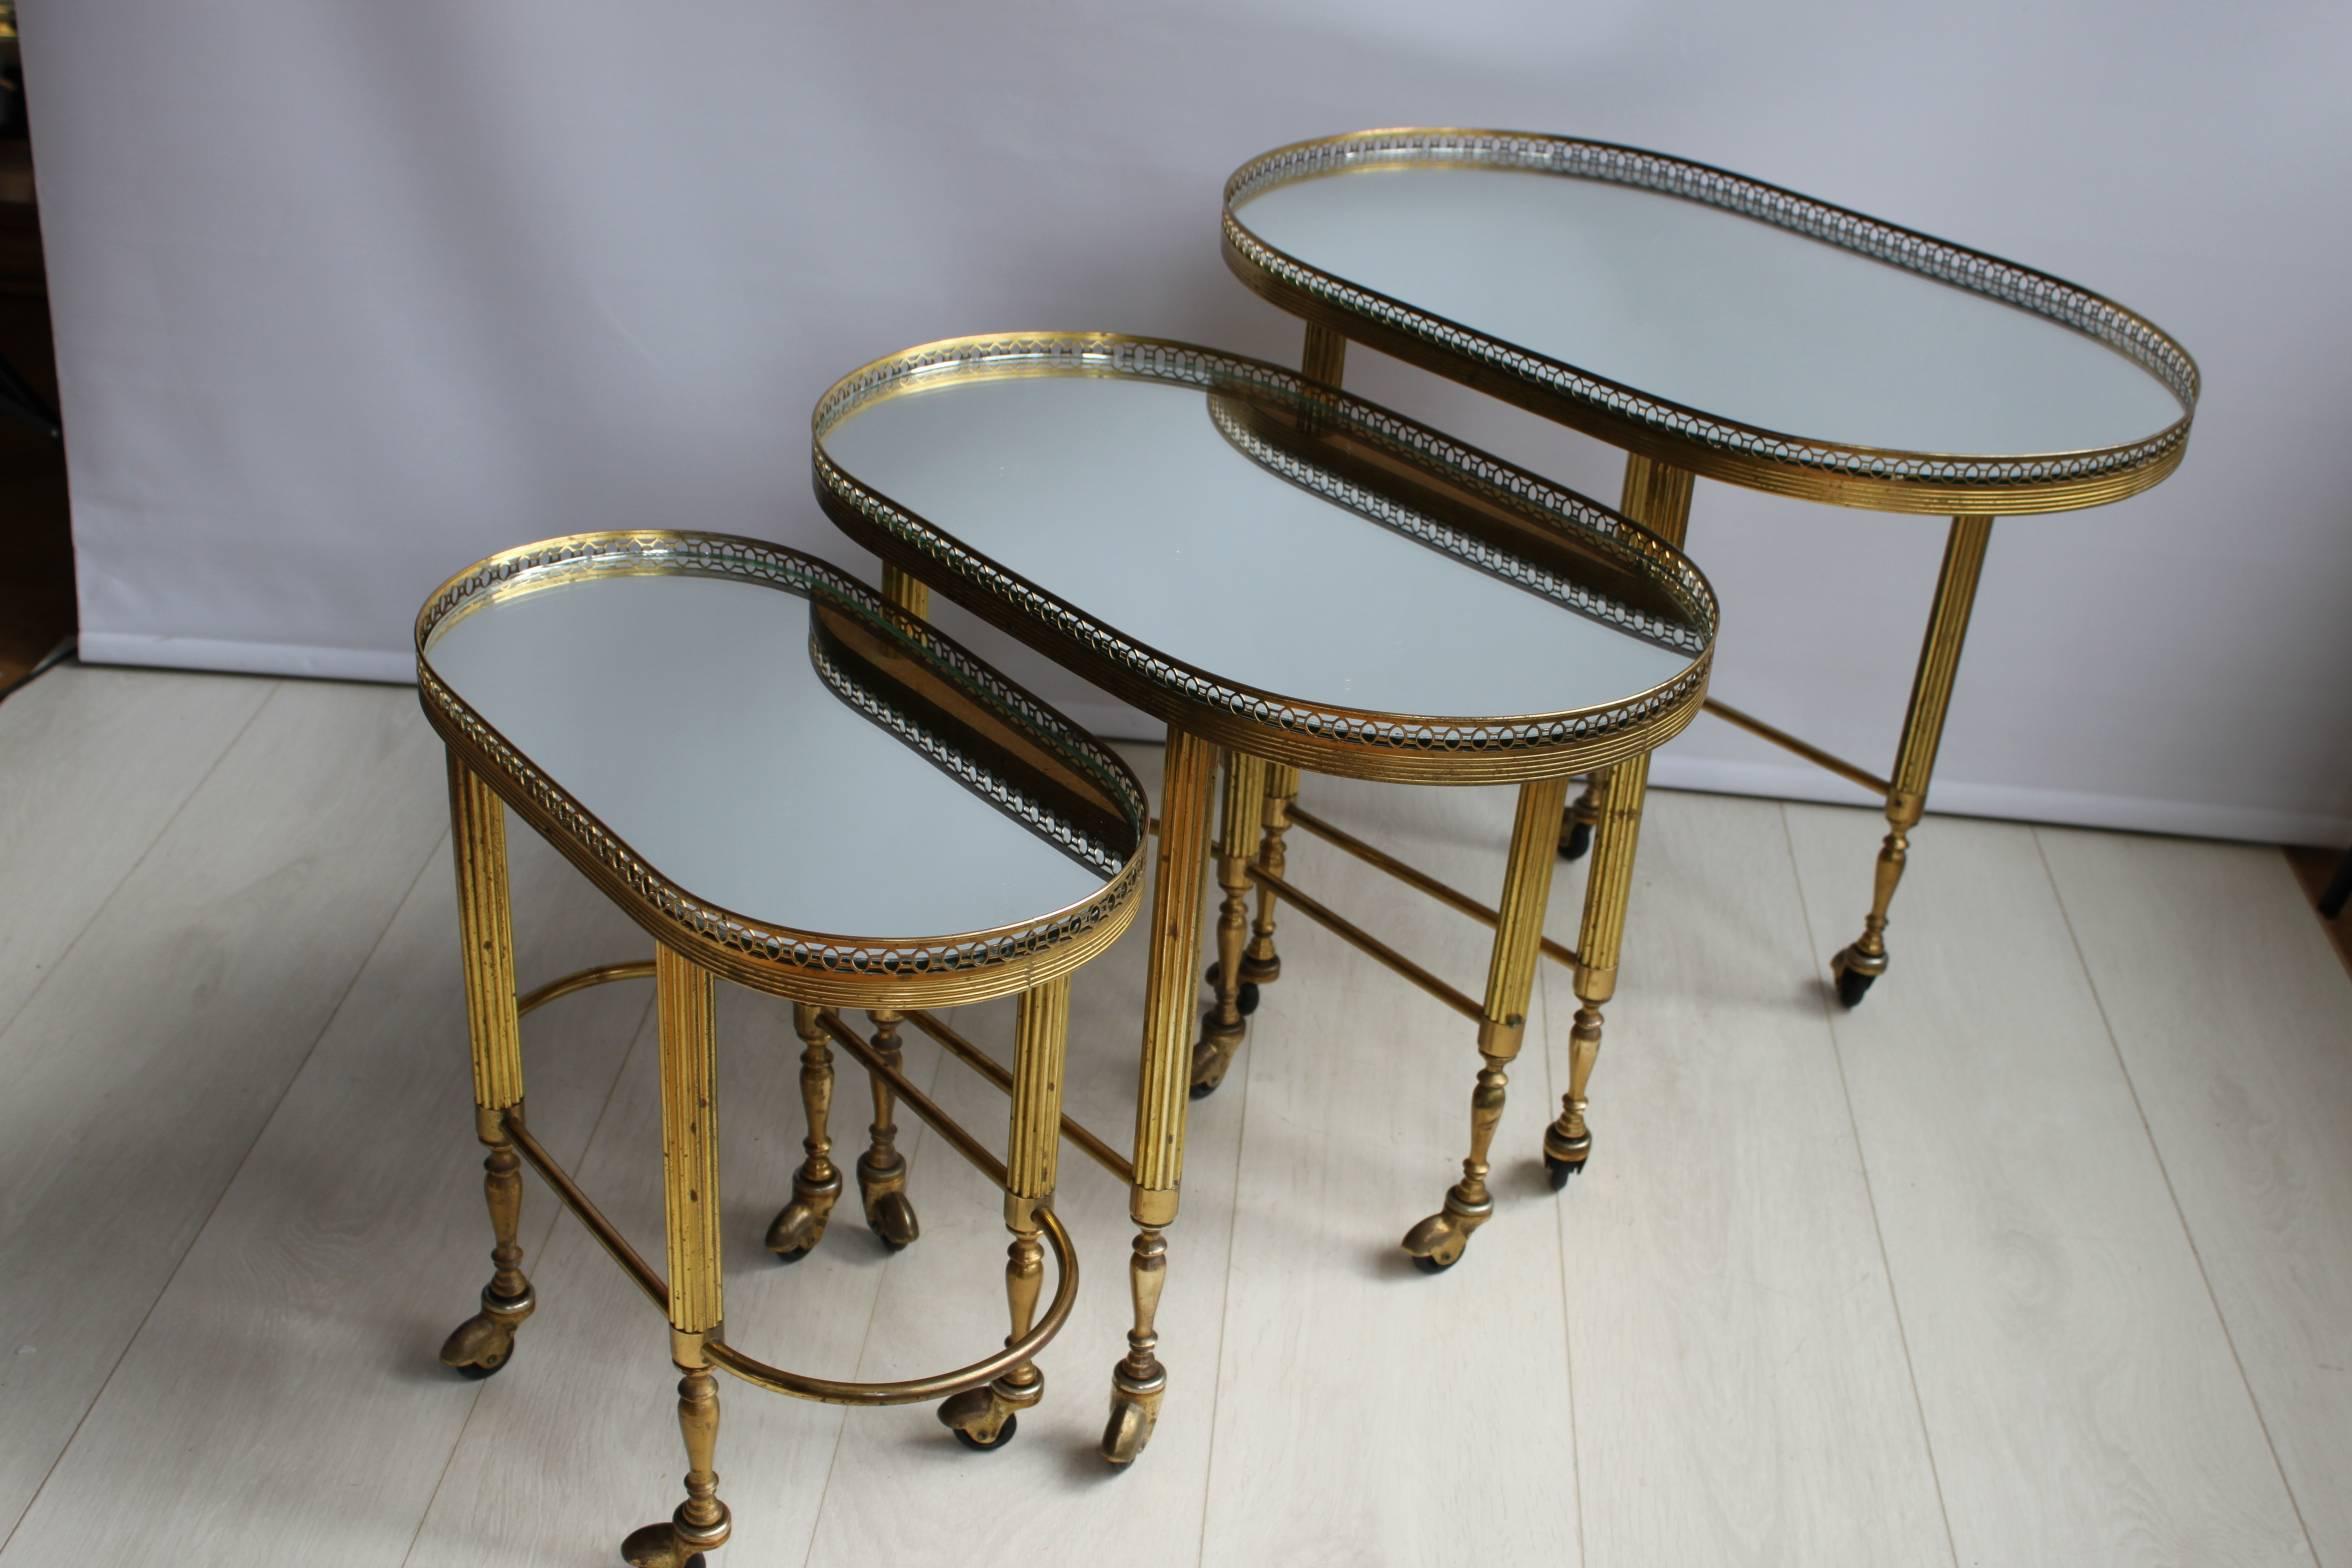 Attractive nest of brass trolleys from France.

Mirrored tops with aged patina to the frame.

Largest trolley measures 61cm wide, 39.5cm deep and 51.5cm tall.
Medium: 52cm wide, 31cm wide, 46cm tall.
Smallest: 43cm wide, 23cm deep, 41.5cm tall.